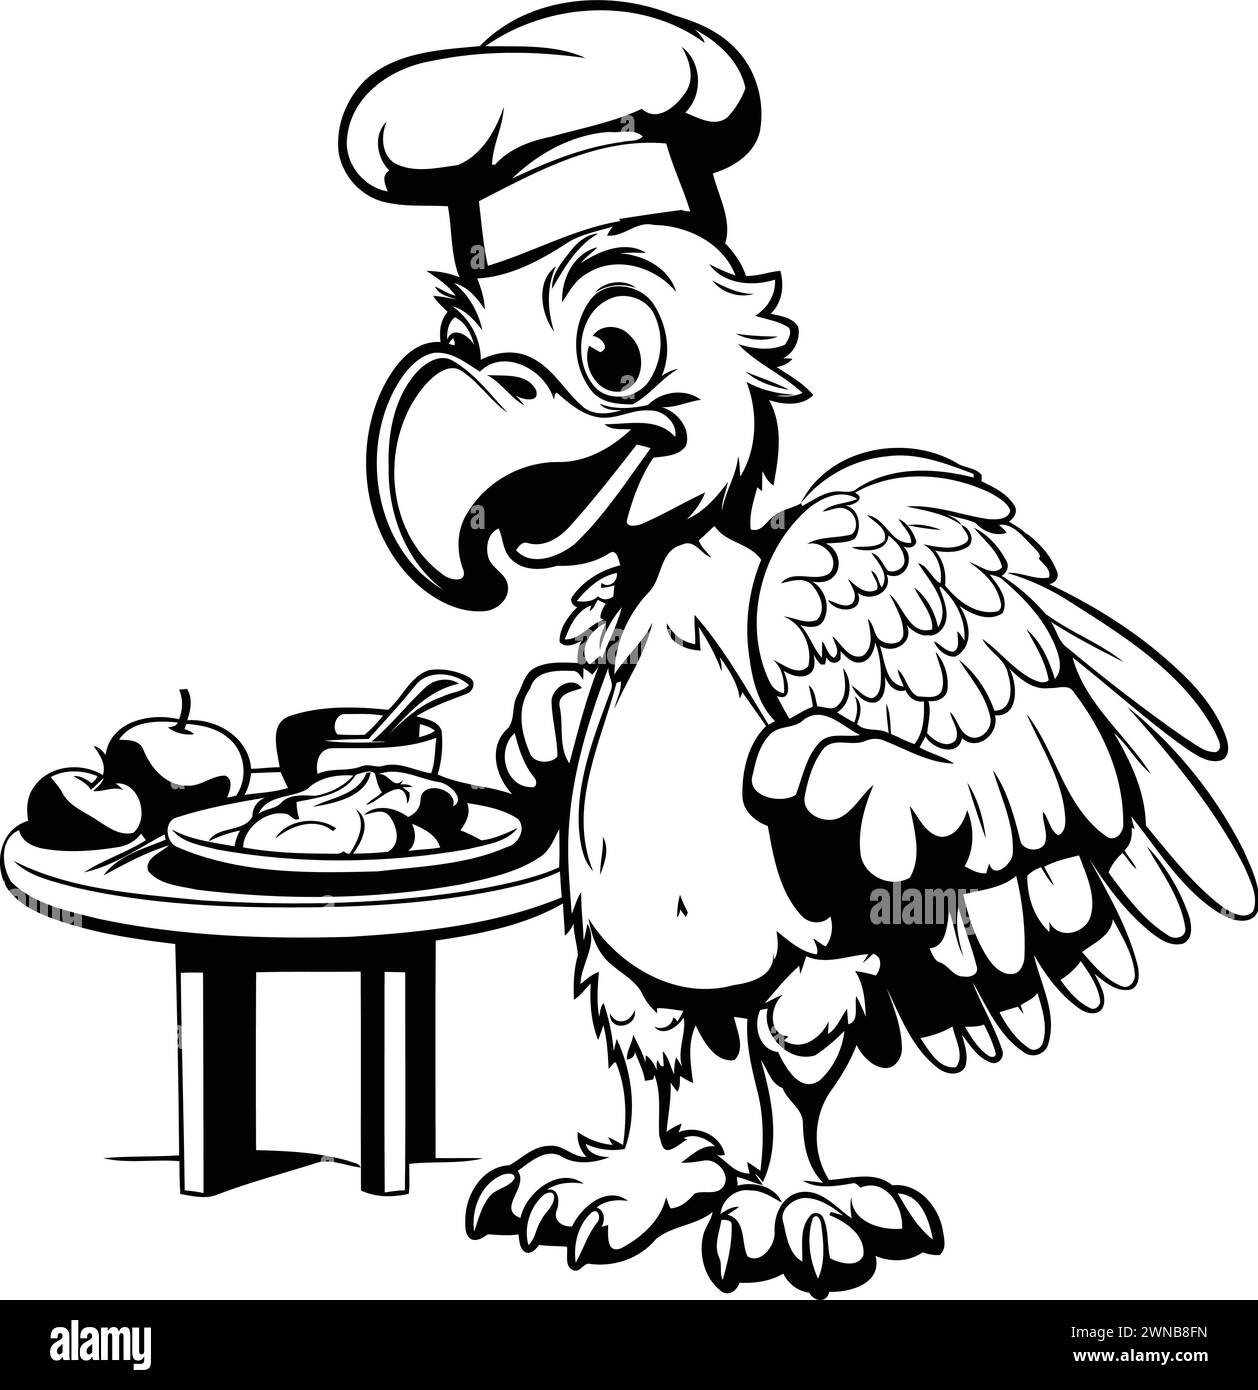 Illustration of a parrot chef with a plate of food. Stock Vector